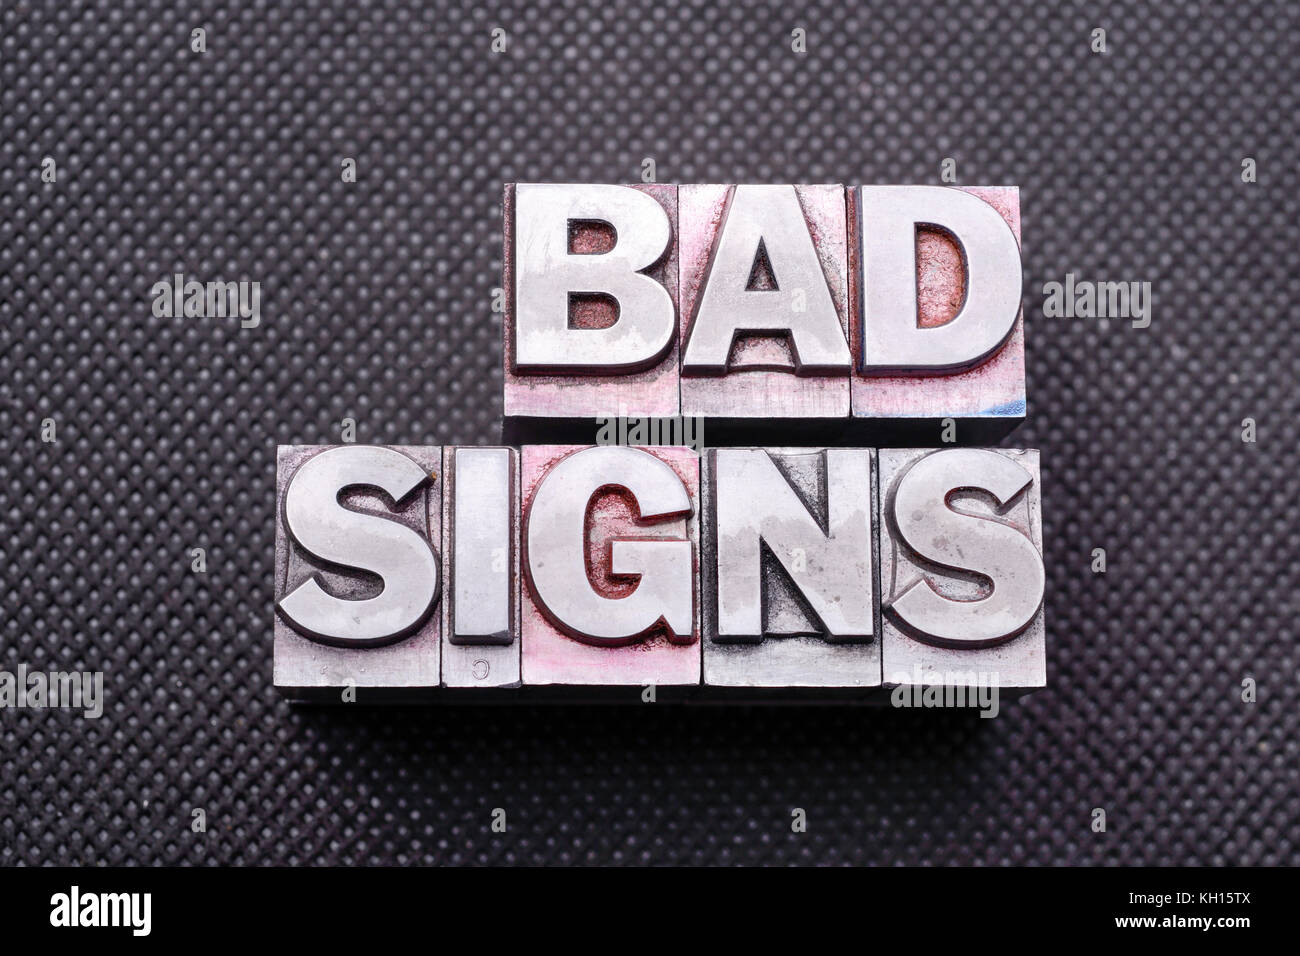 bad signs phrase made from metallic letterpress blocks on black perforated surface Stock Photo